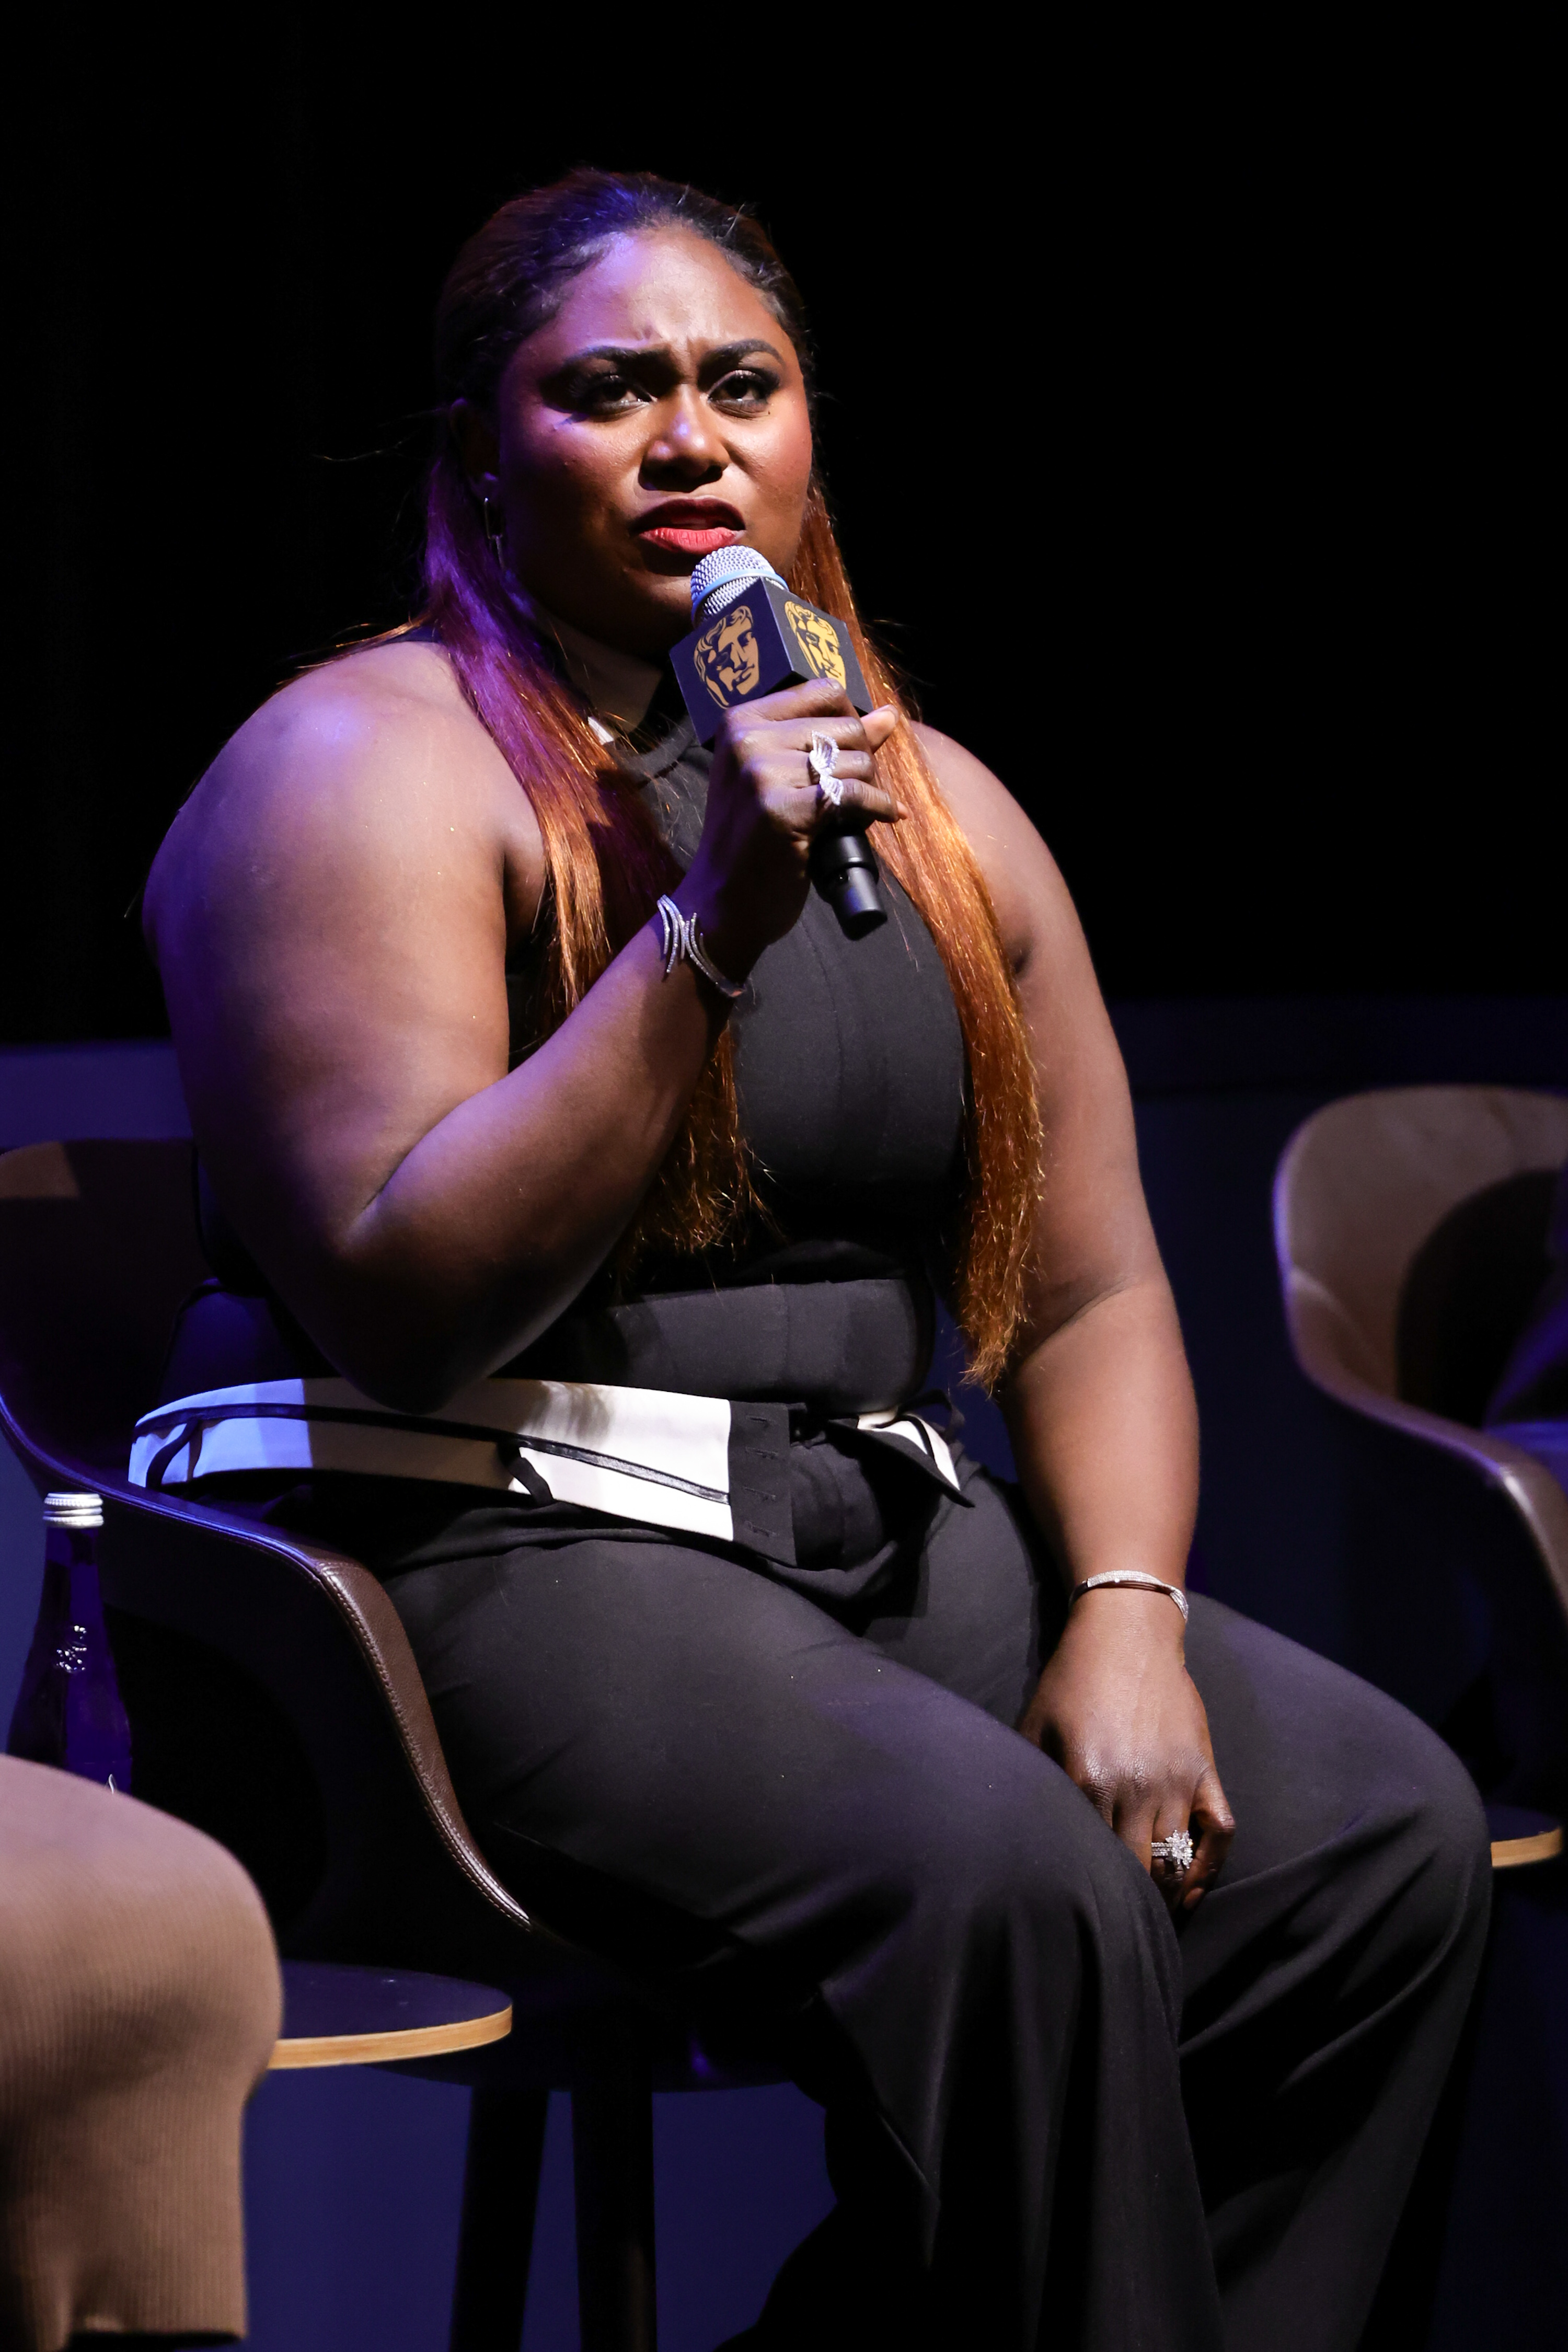 Close-up of Danielle seated onstage and holding a microphone